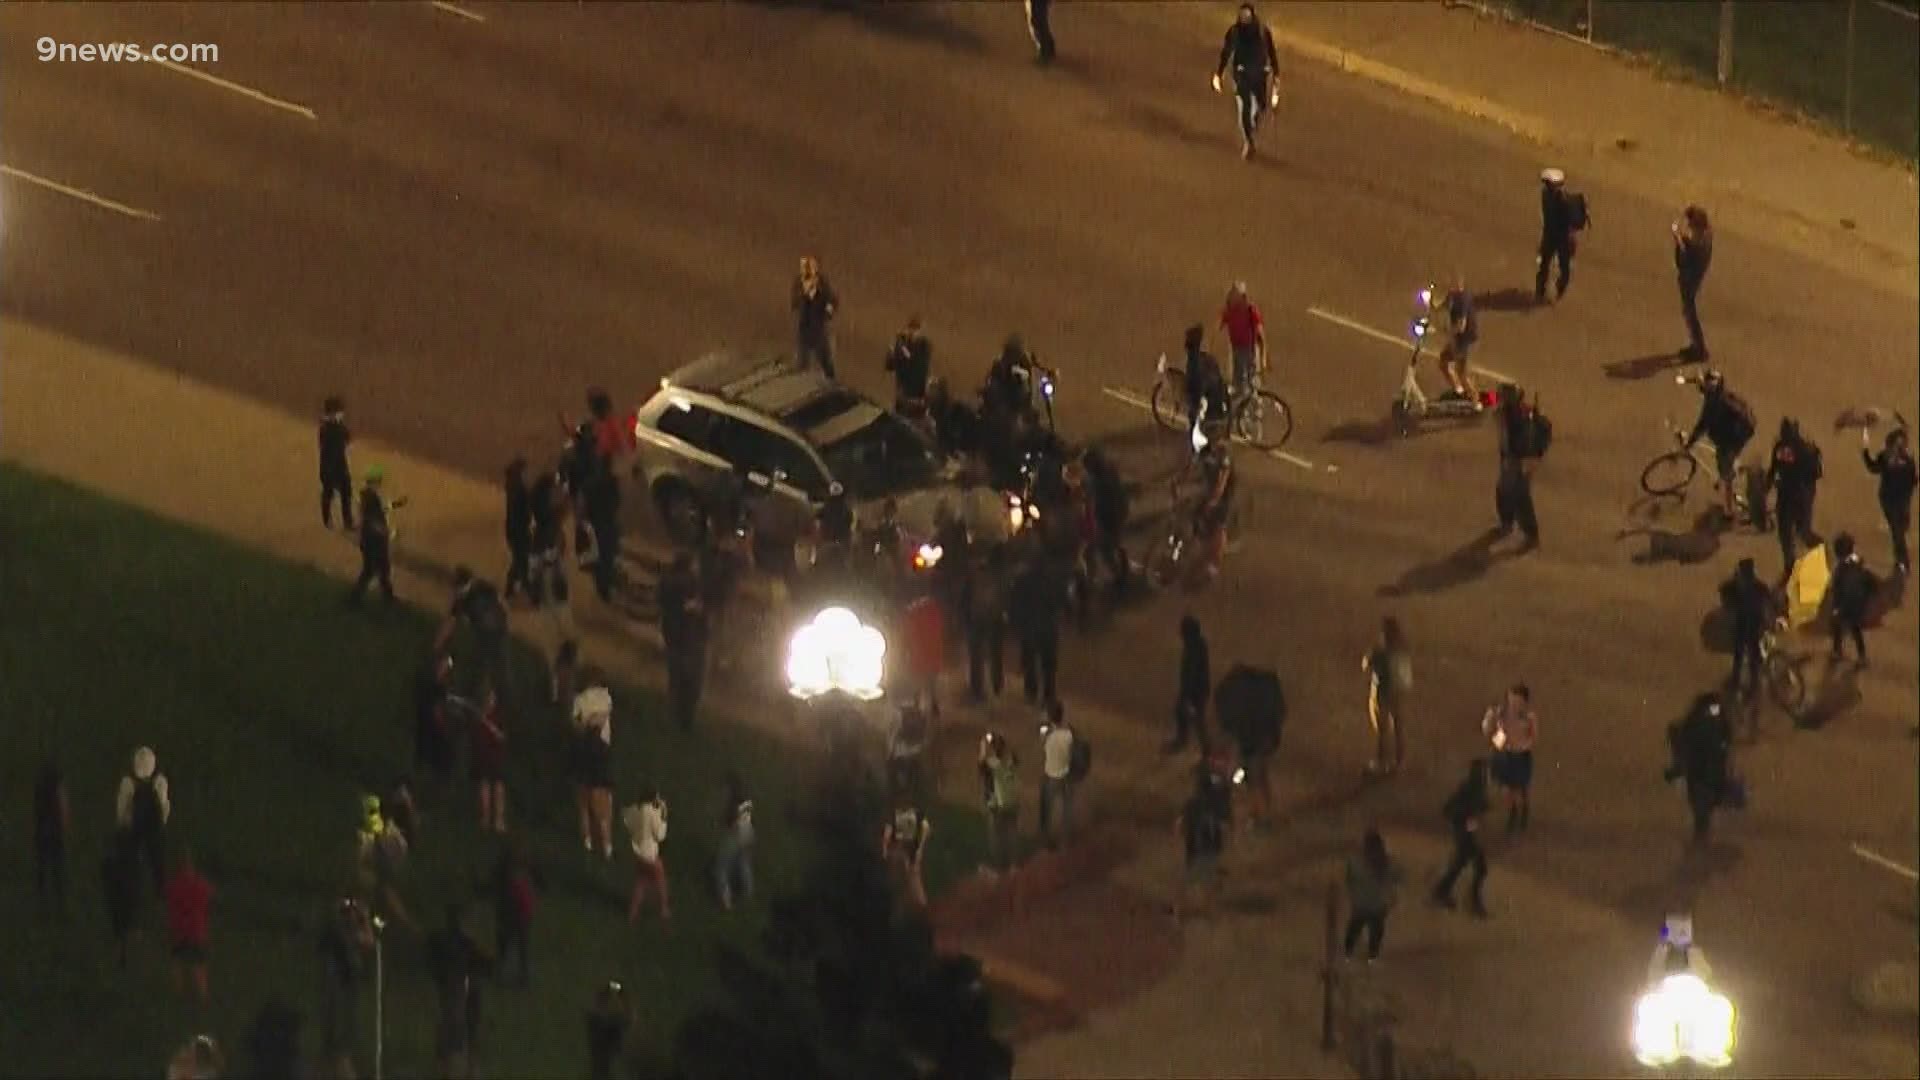 A large group dispersed earlier Wednesday night, then a small group moved toward a police precinct.